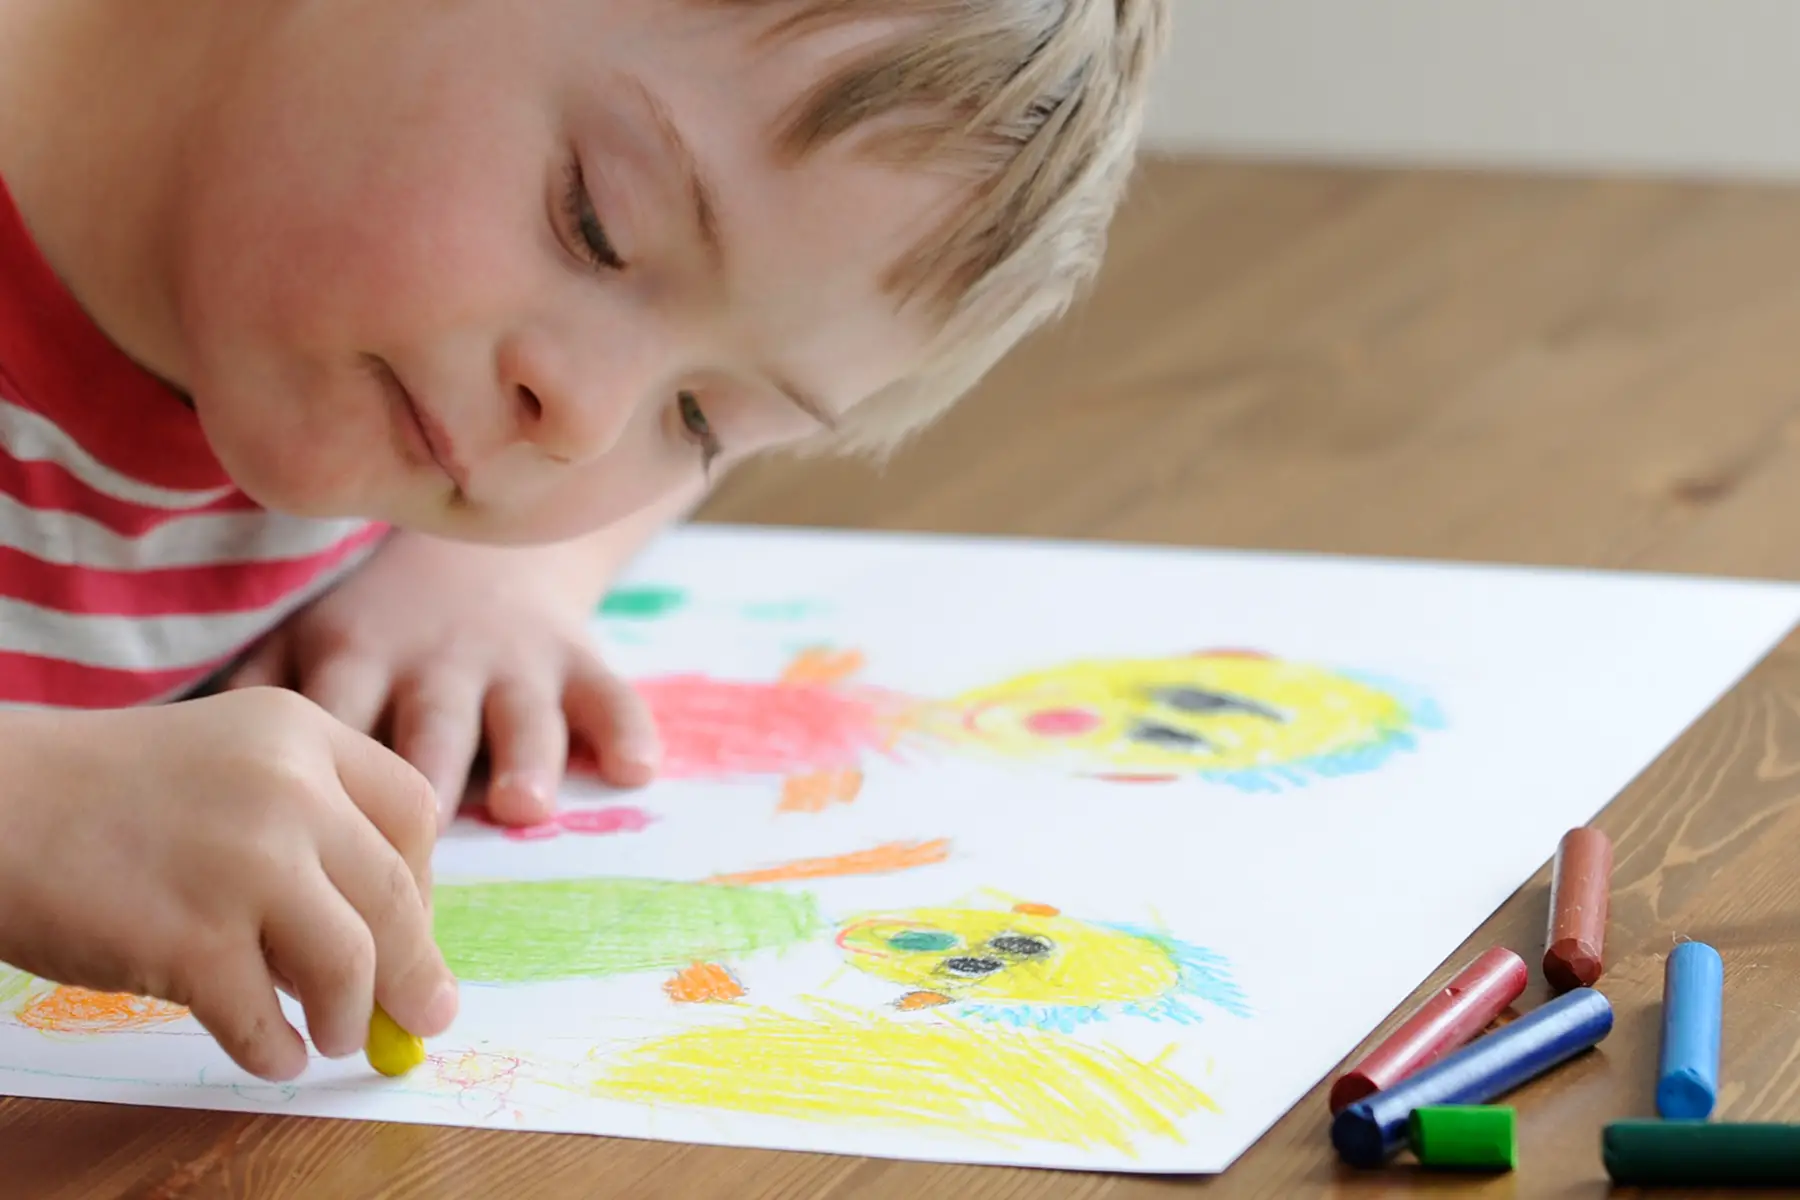 A child with Down's Syndrome drawing a picture in crayon of two people.